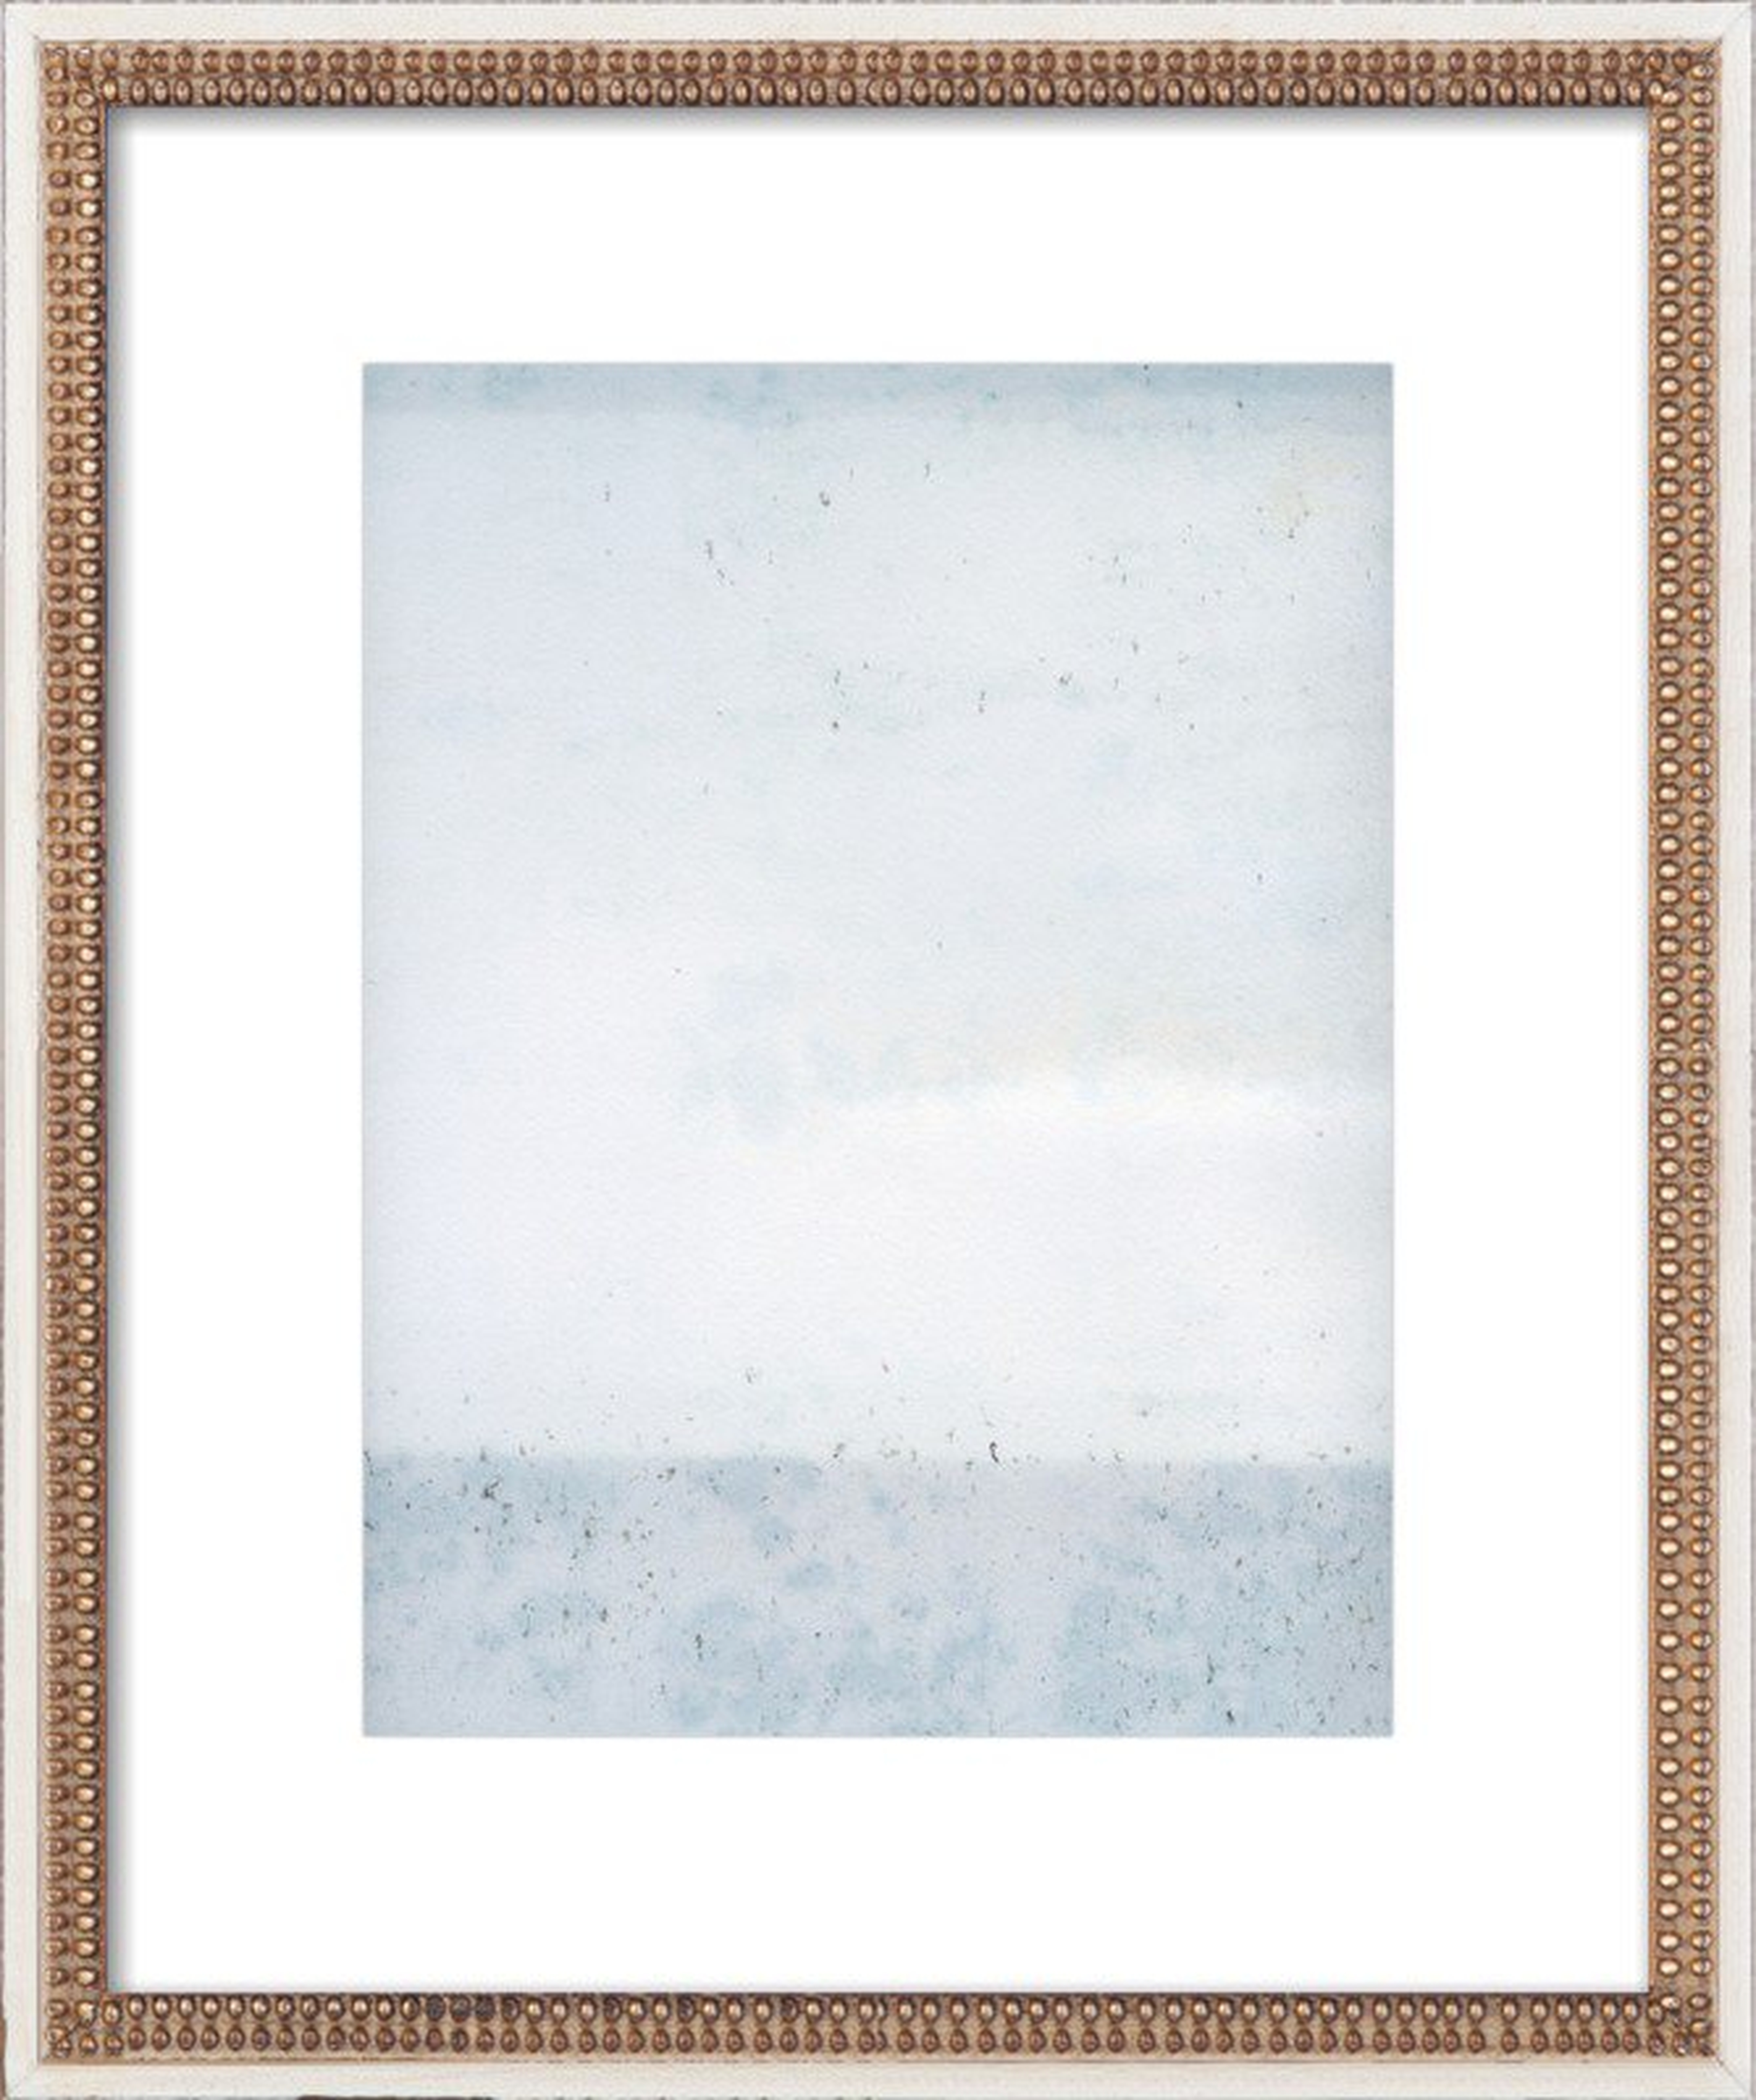 Overast - Soft Blues - FINAL FRAMED SIZE: 16x20" Distressed Cream Double Bead Wood, frame width 1.25", depth 1.69" - Artfully Walls